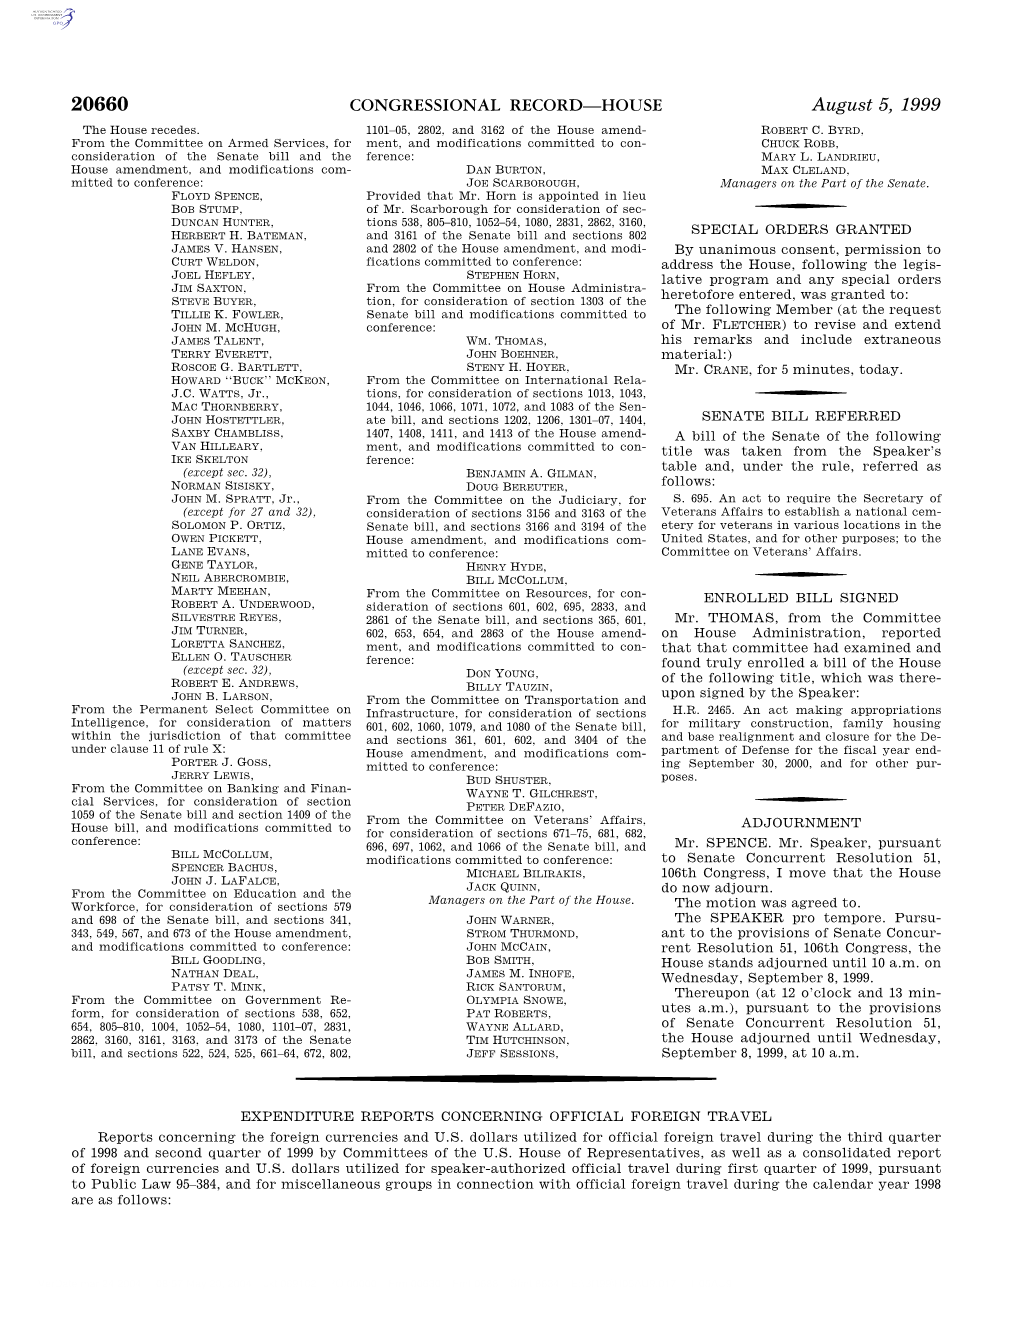 CONGRESSIONAL RECORD—HOUSE August 5, 1999